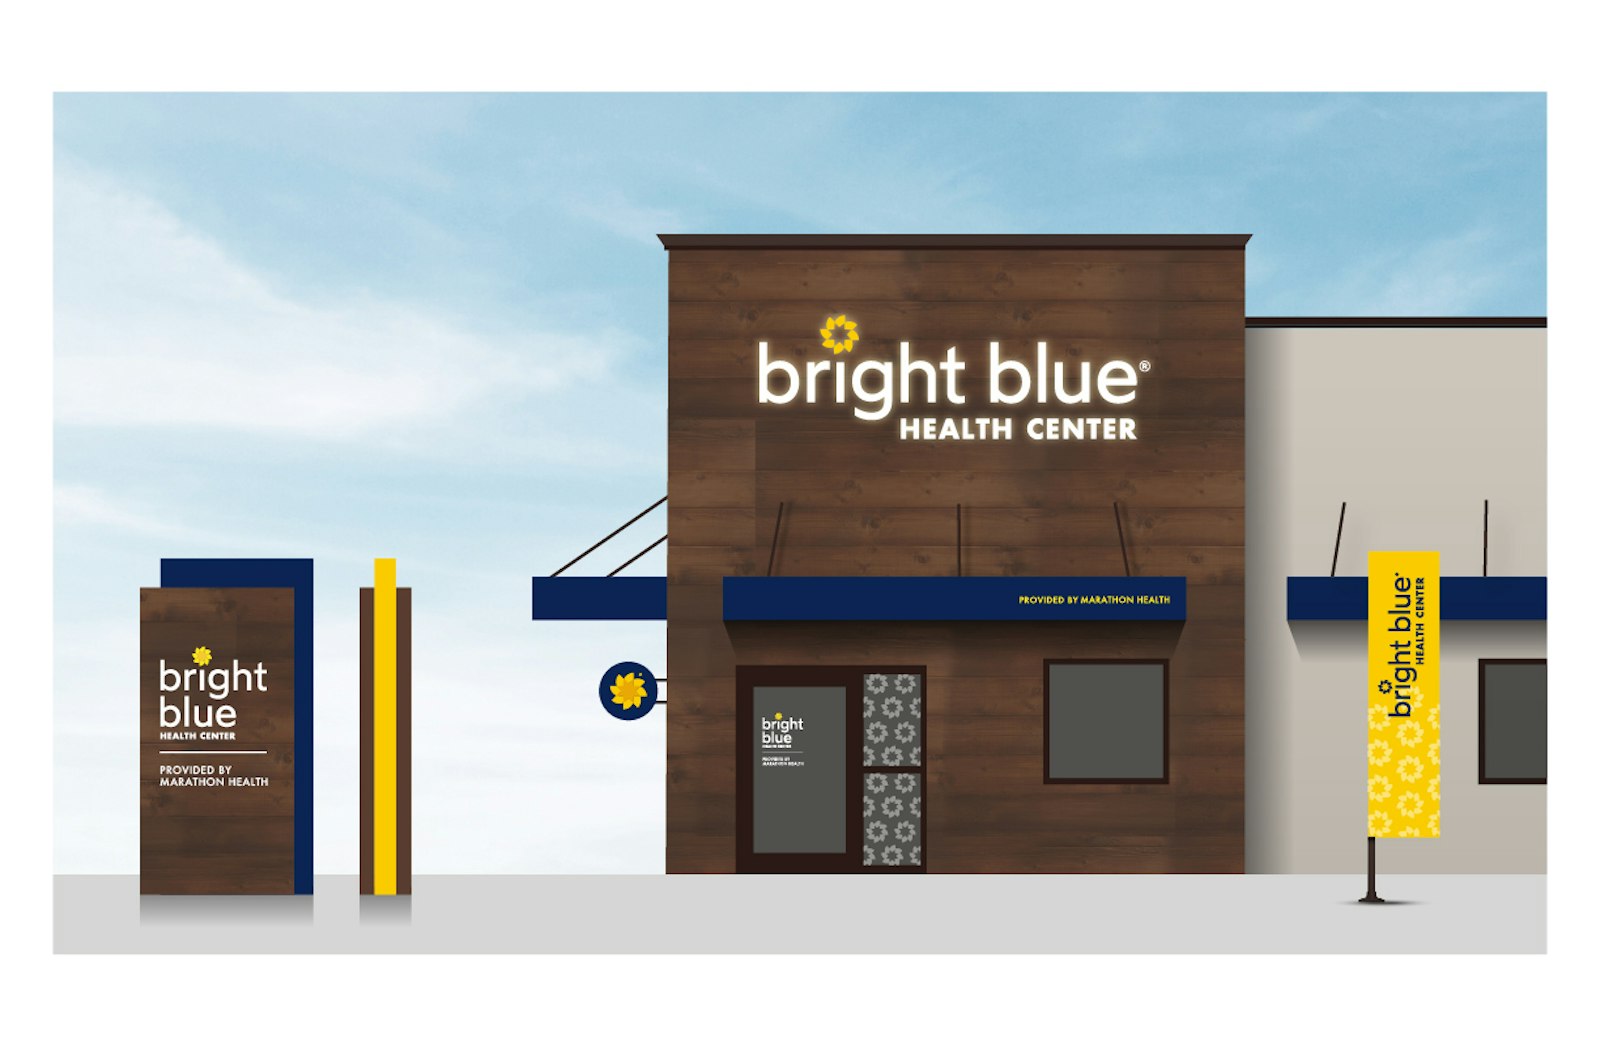 The Bright Blue brand design signage illustrations of a building and banners.